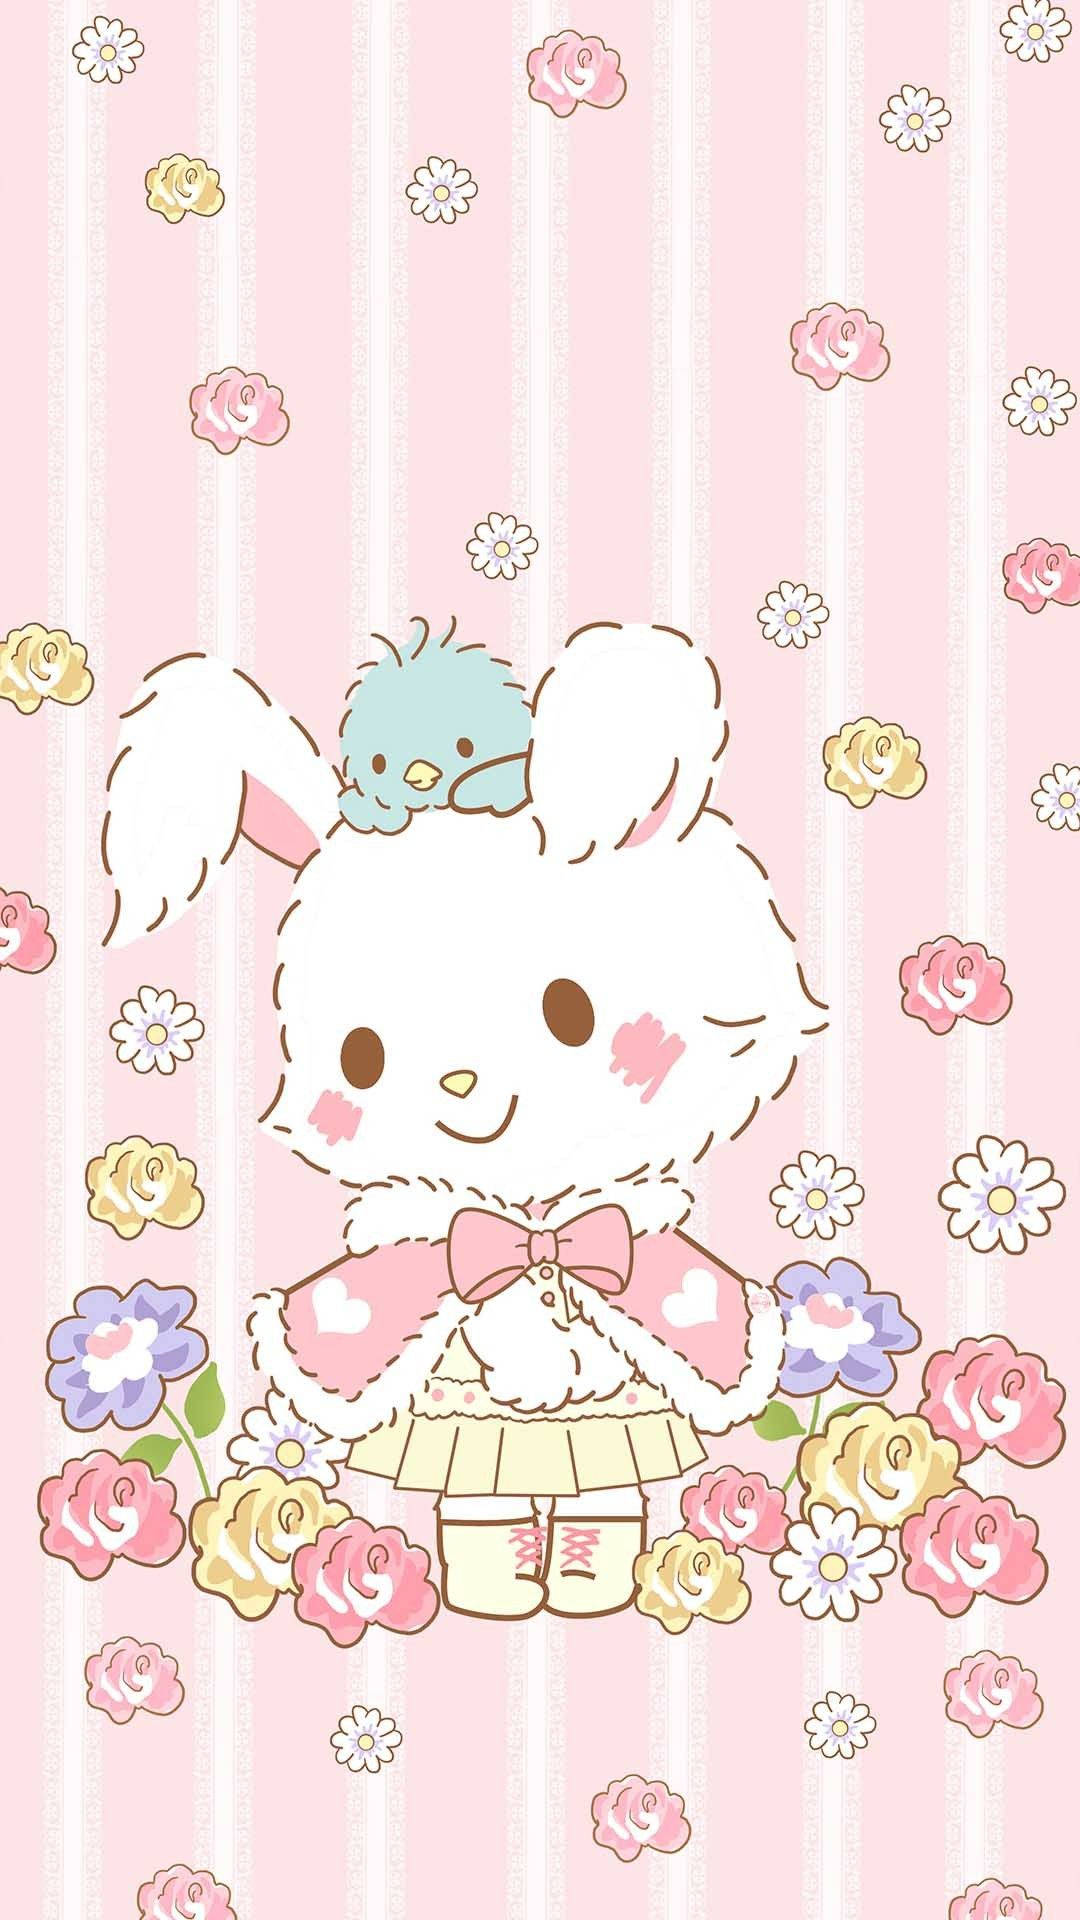 Make A Wish With Wish Me Mell And Sanrio! Background